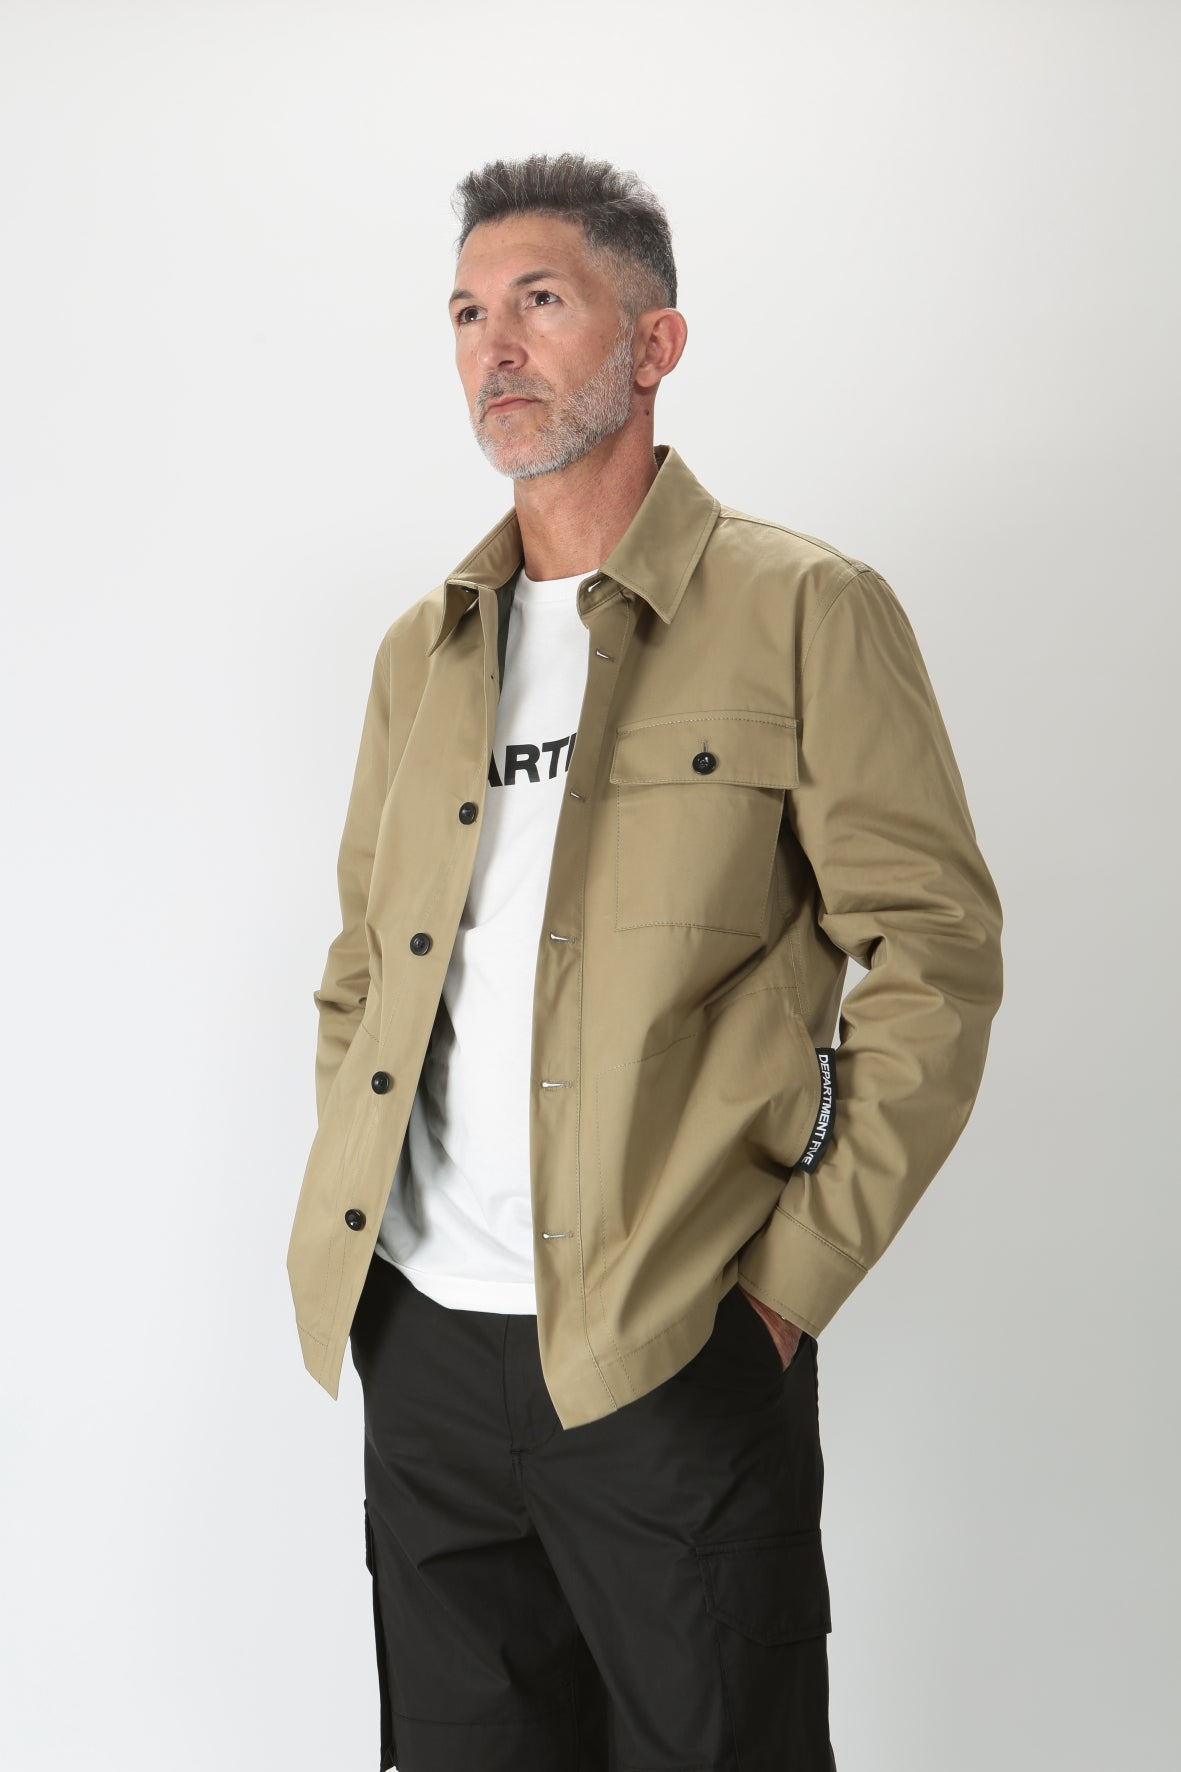 https://admin.shopify.com/store/gulieshop/products/9055395053917#:~:text=Invia-,Department%205%20Overshirt%20in%20cotone%20Pike%20UC047482TF0236000059,-Contenuto%20multimediale%201